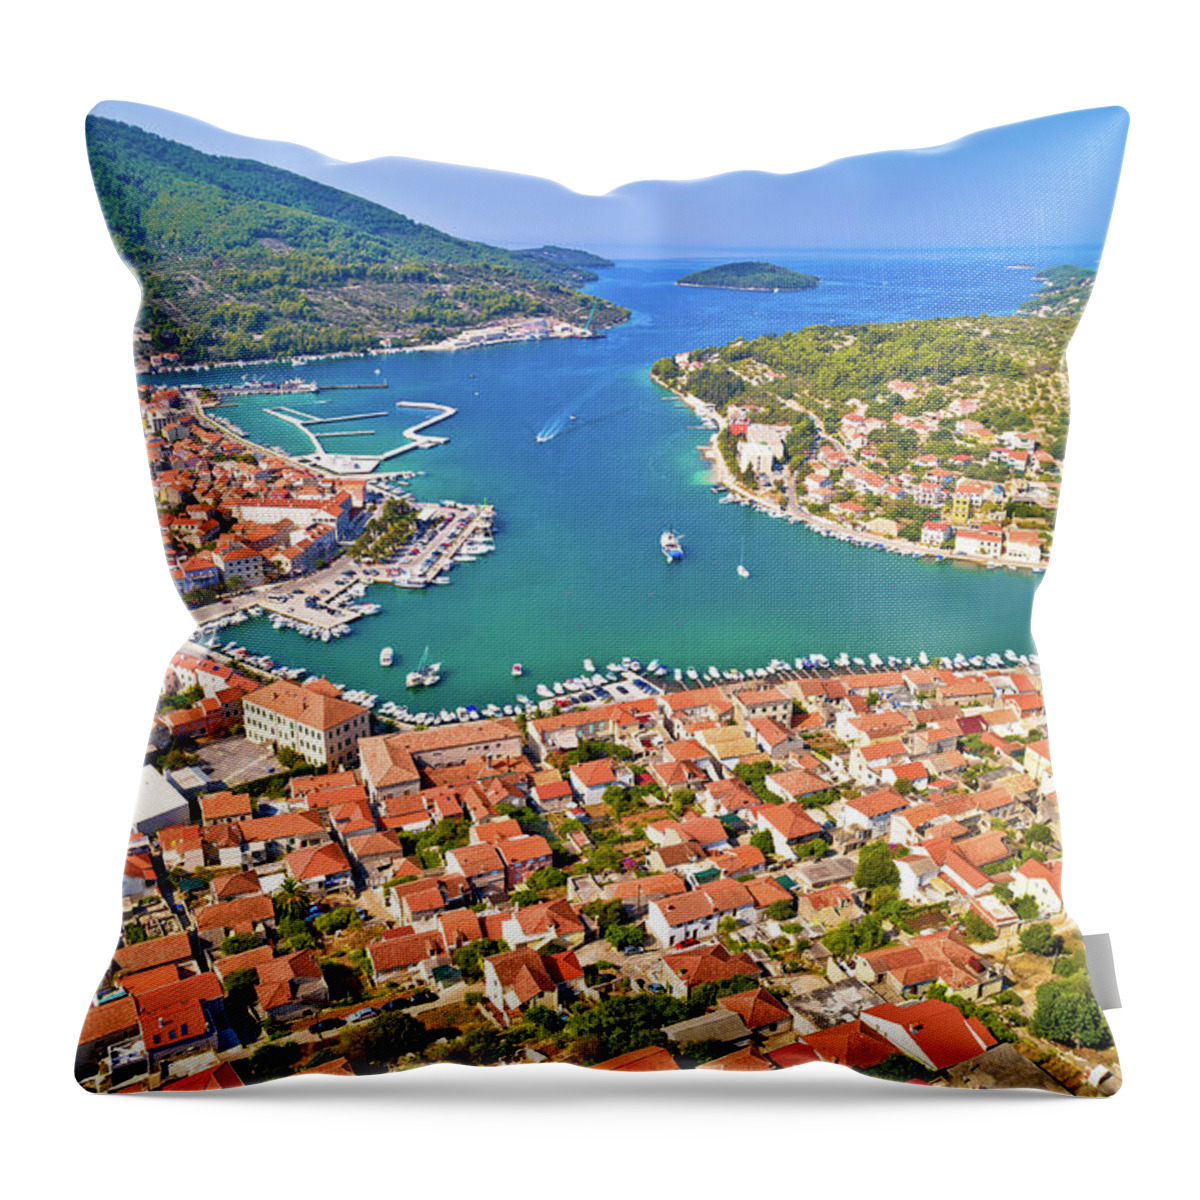 Vela Luka Throw Pillow featuring the photograph Bay of Vela Luka on Korcula island aerial view by Brch Photography